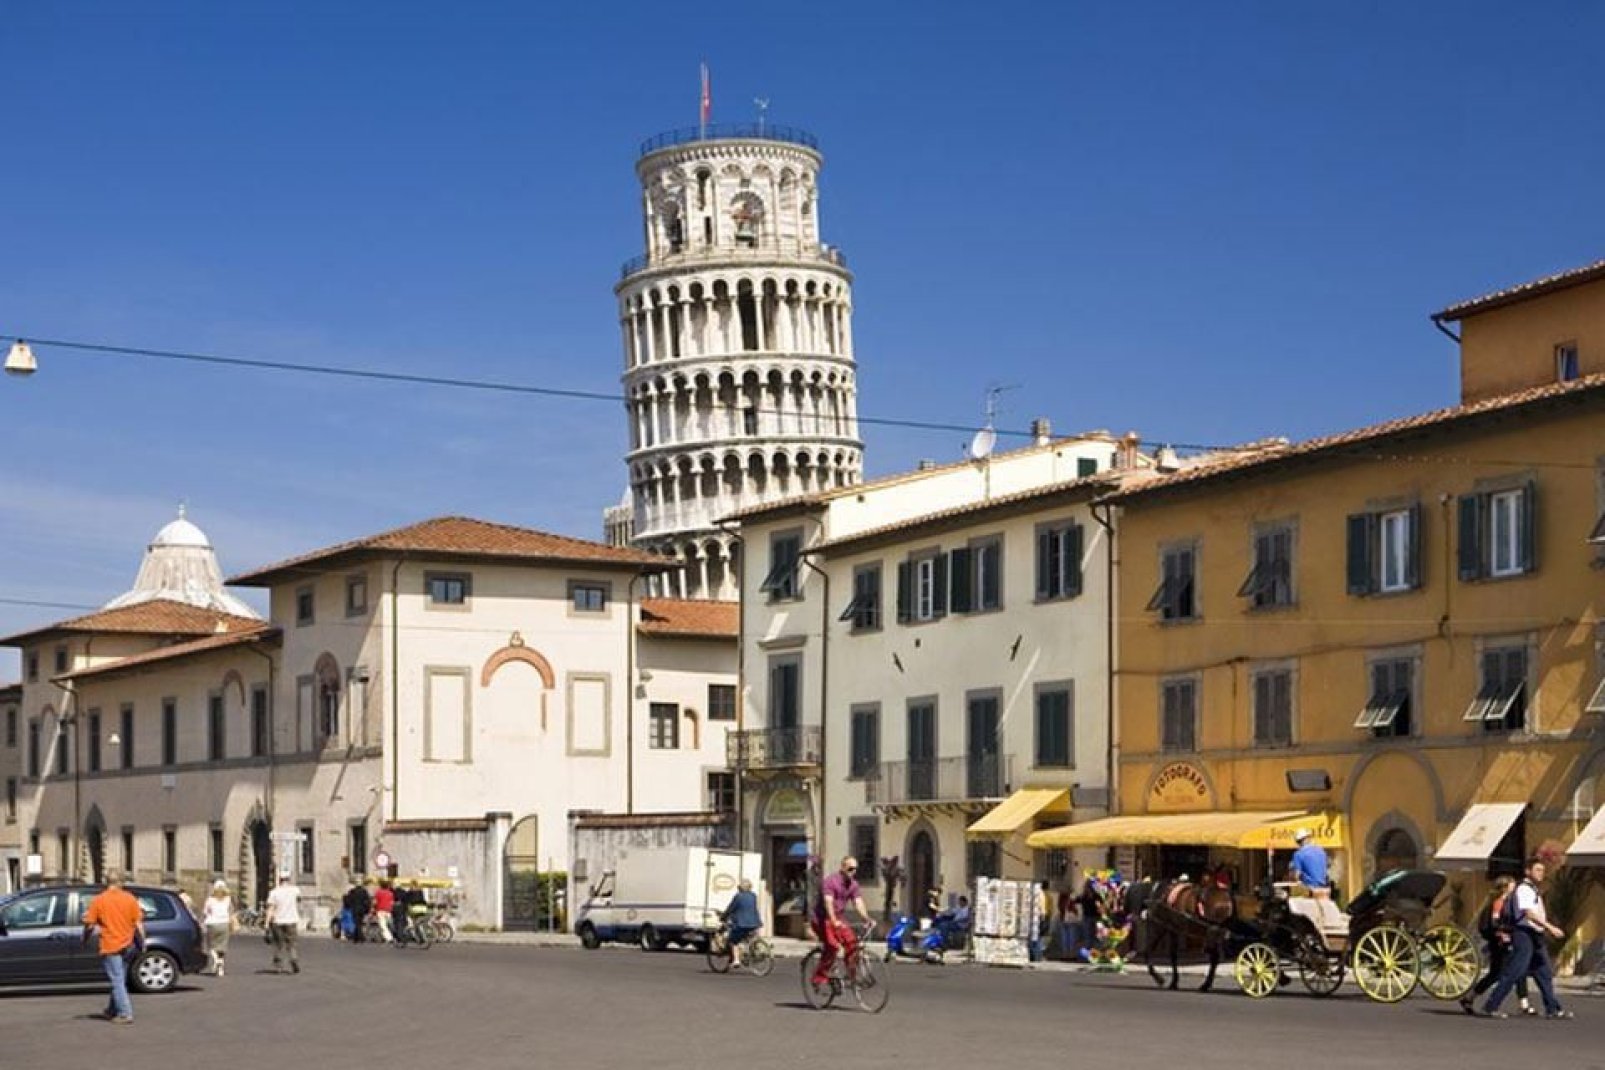 The top of the tower can be seen rising above the houses in the centre of Pisa